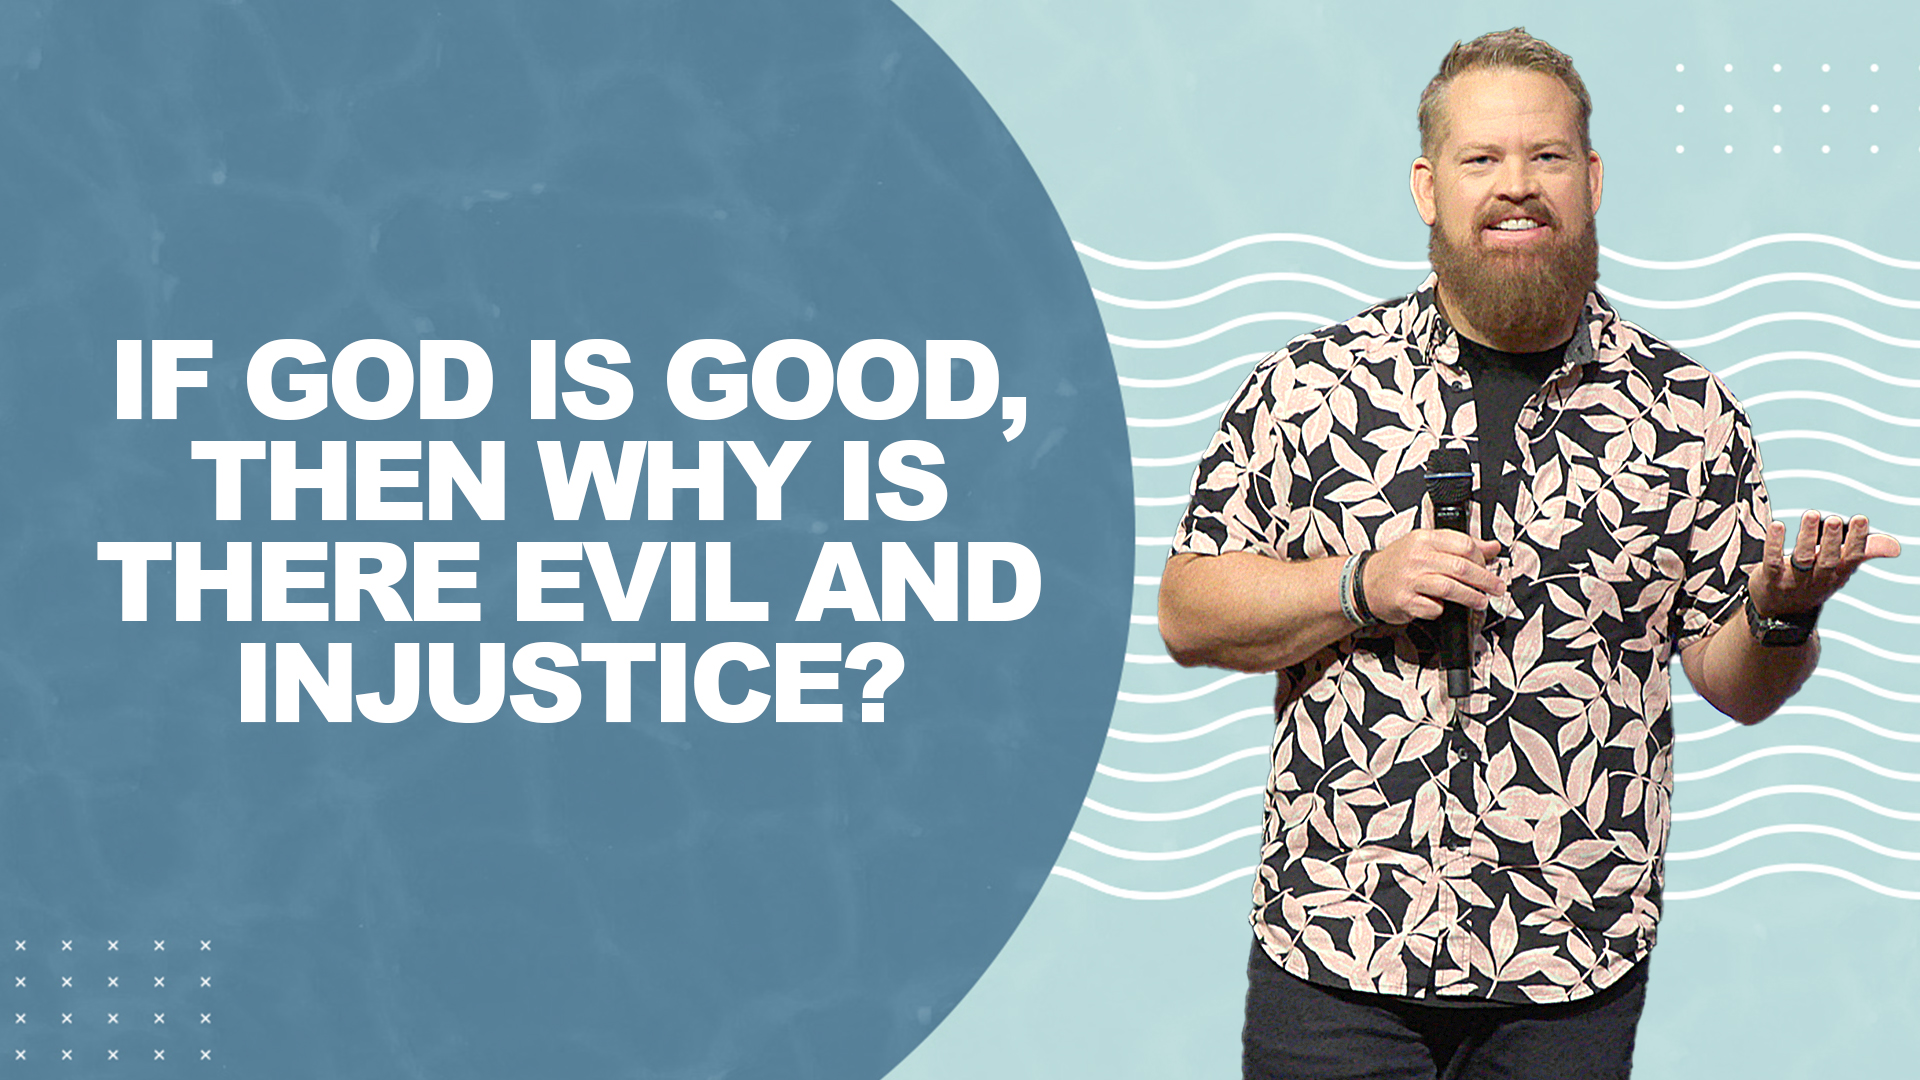 If God is Good, Then Why Is There Evil and Injustice?